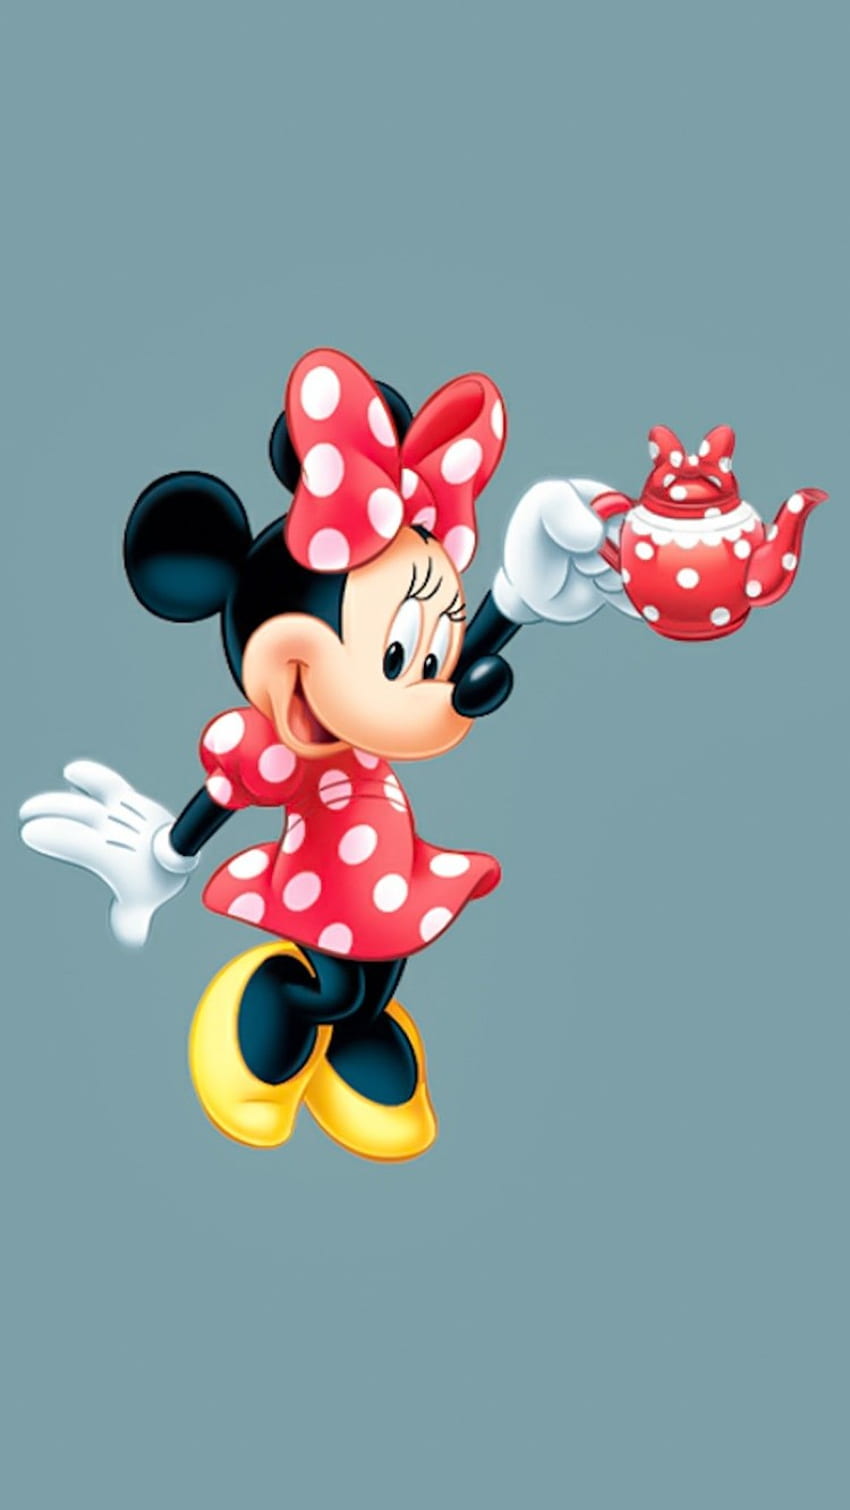 Mickey Mouse Disney Aesthetic : Minnie Mouse Red Polka Dot Dress - Ide , iPhone , Skema Warna, Mickey Mouse Merah wallpaper ponsel HD